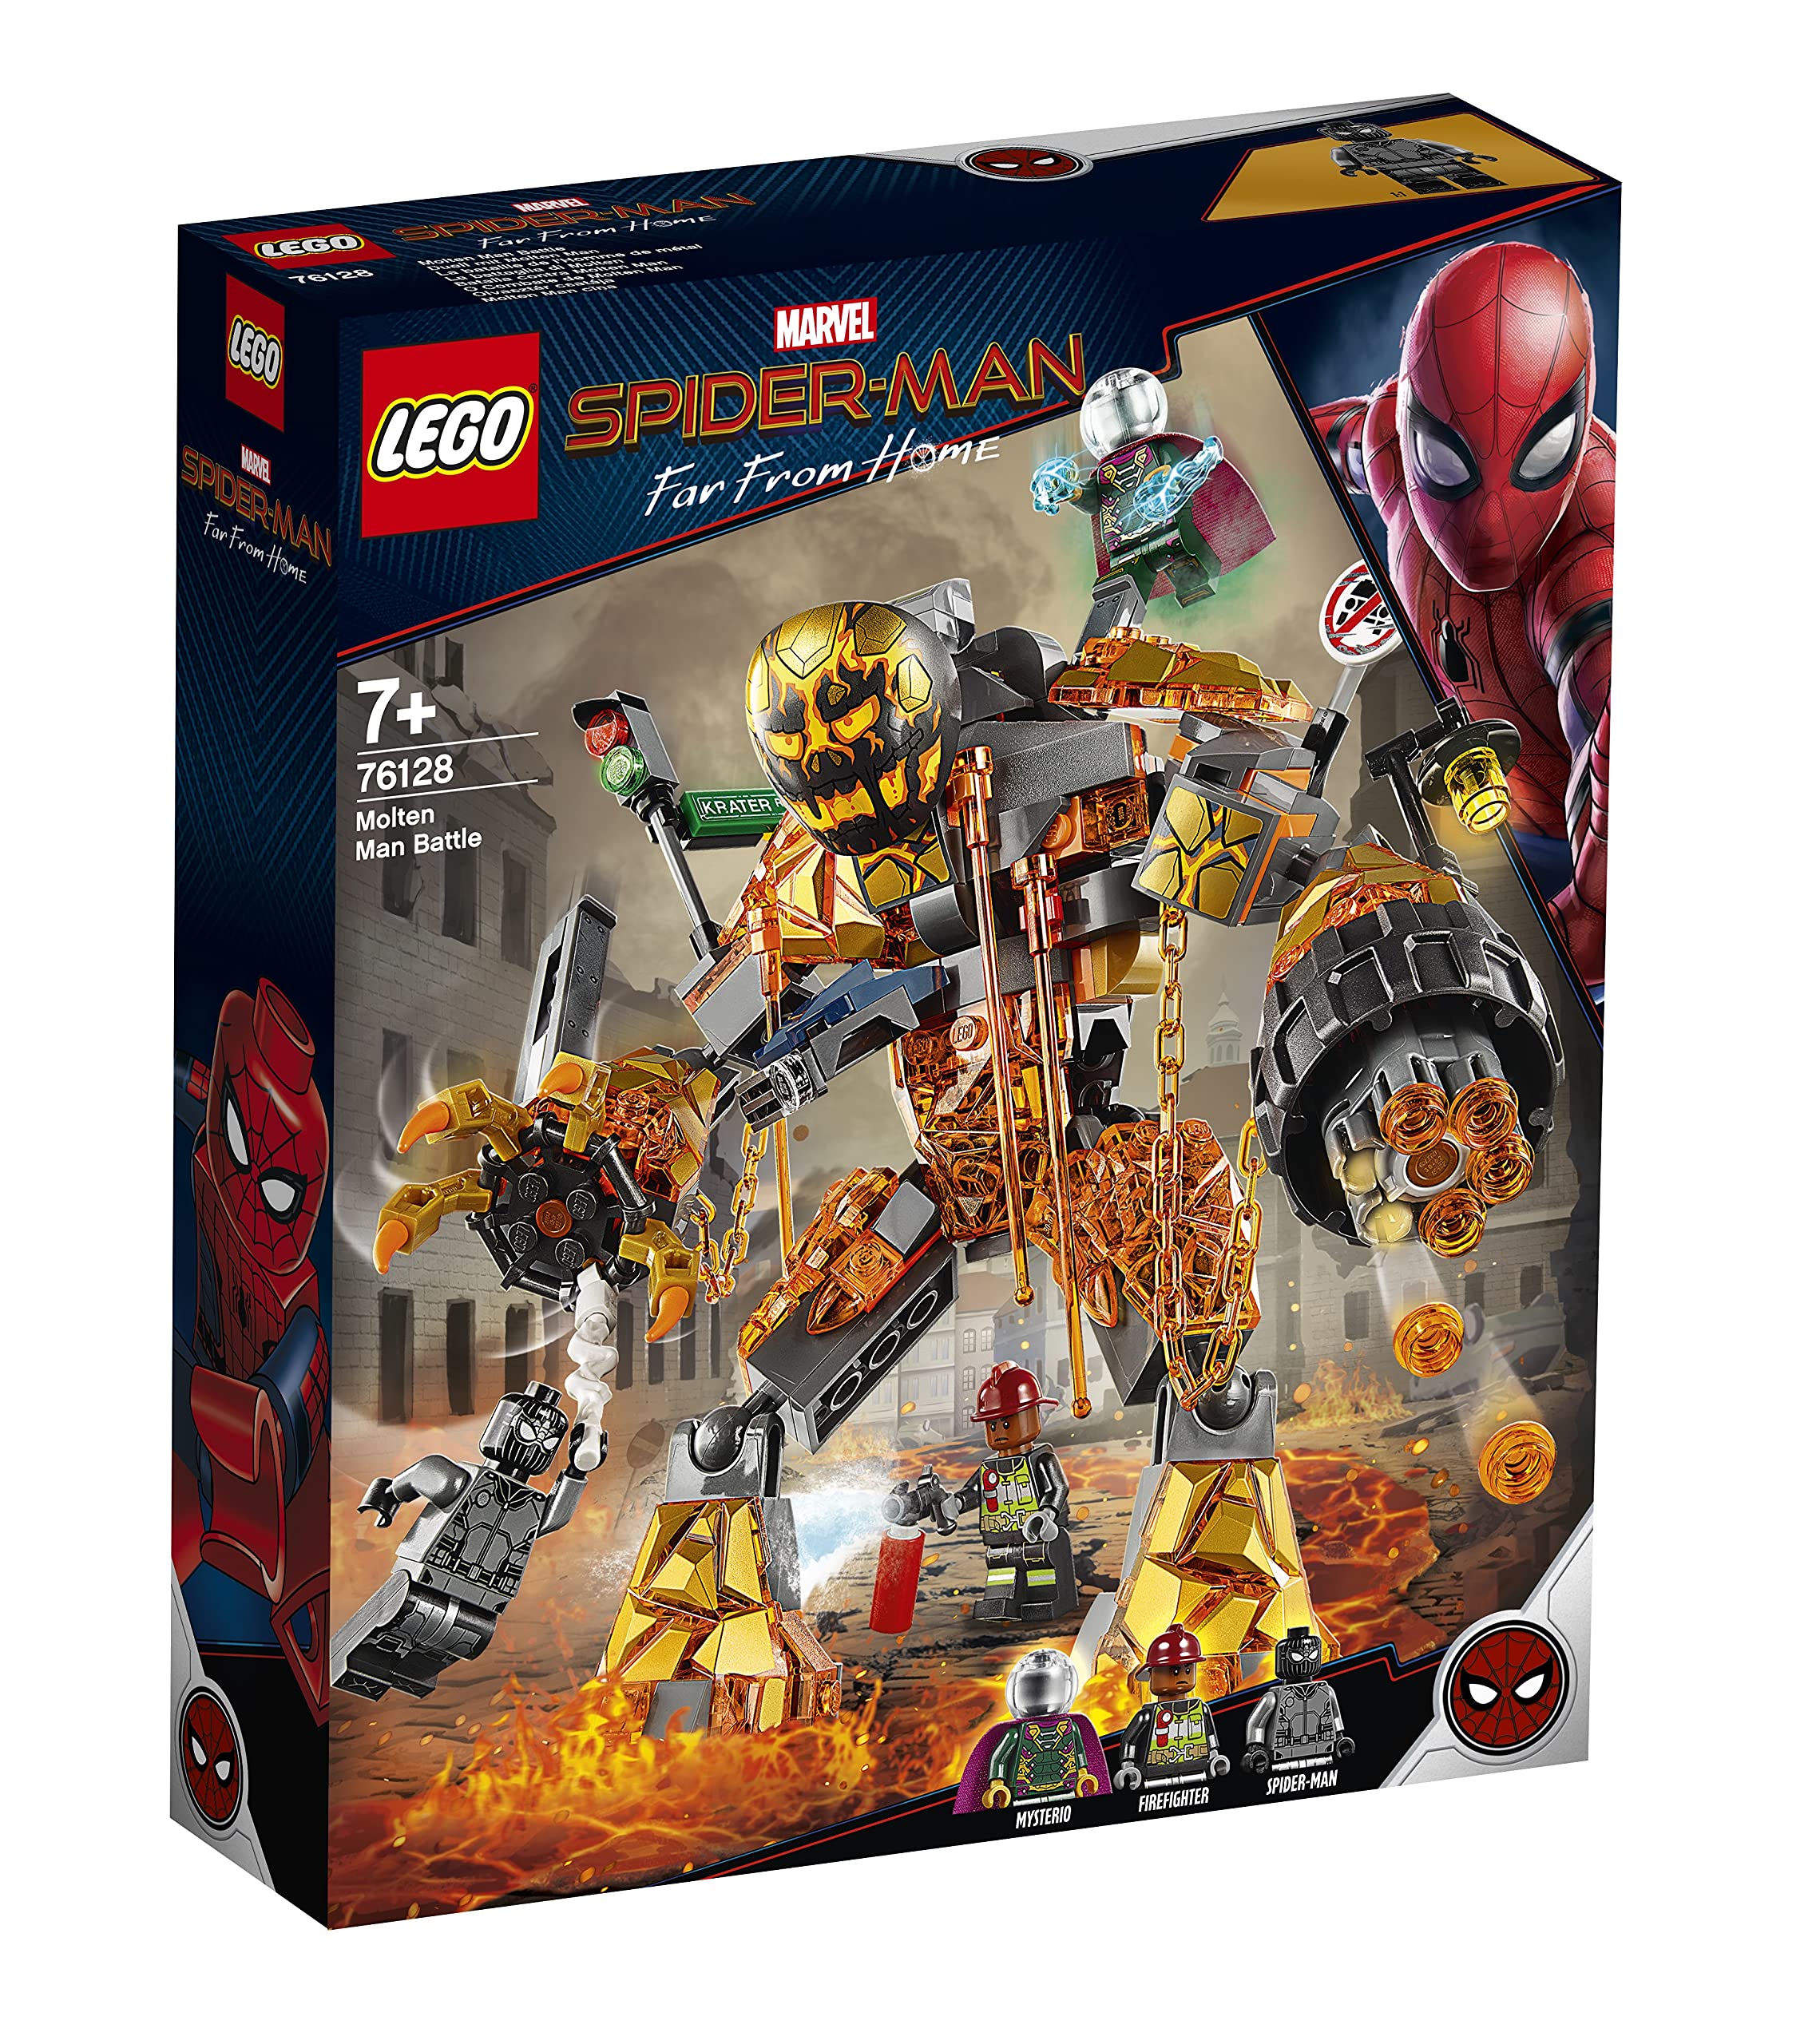 Mua LEGO 76128 Marvel Spider-Man Molten Man Battle with a Buildable Figure  and Mysterio Minifigure, Spiderman: Far From Home Movie trên Amazon Anh  chính hãng 2023 | Giaonhan247